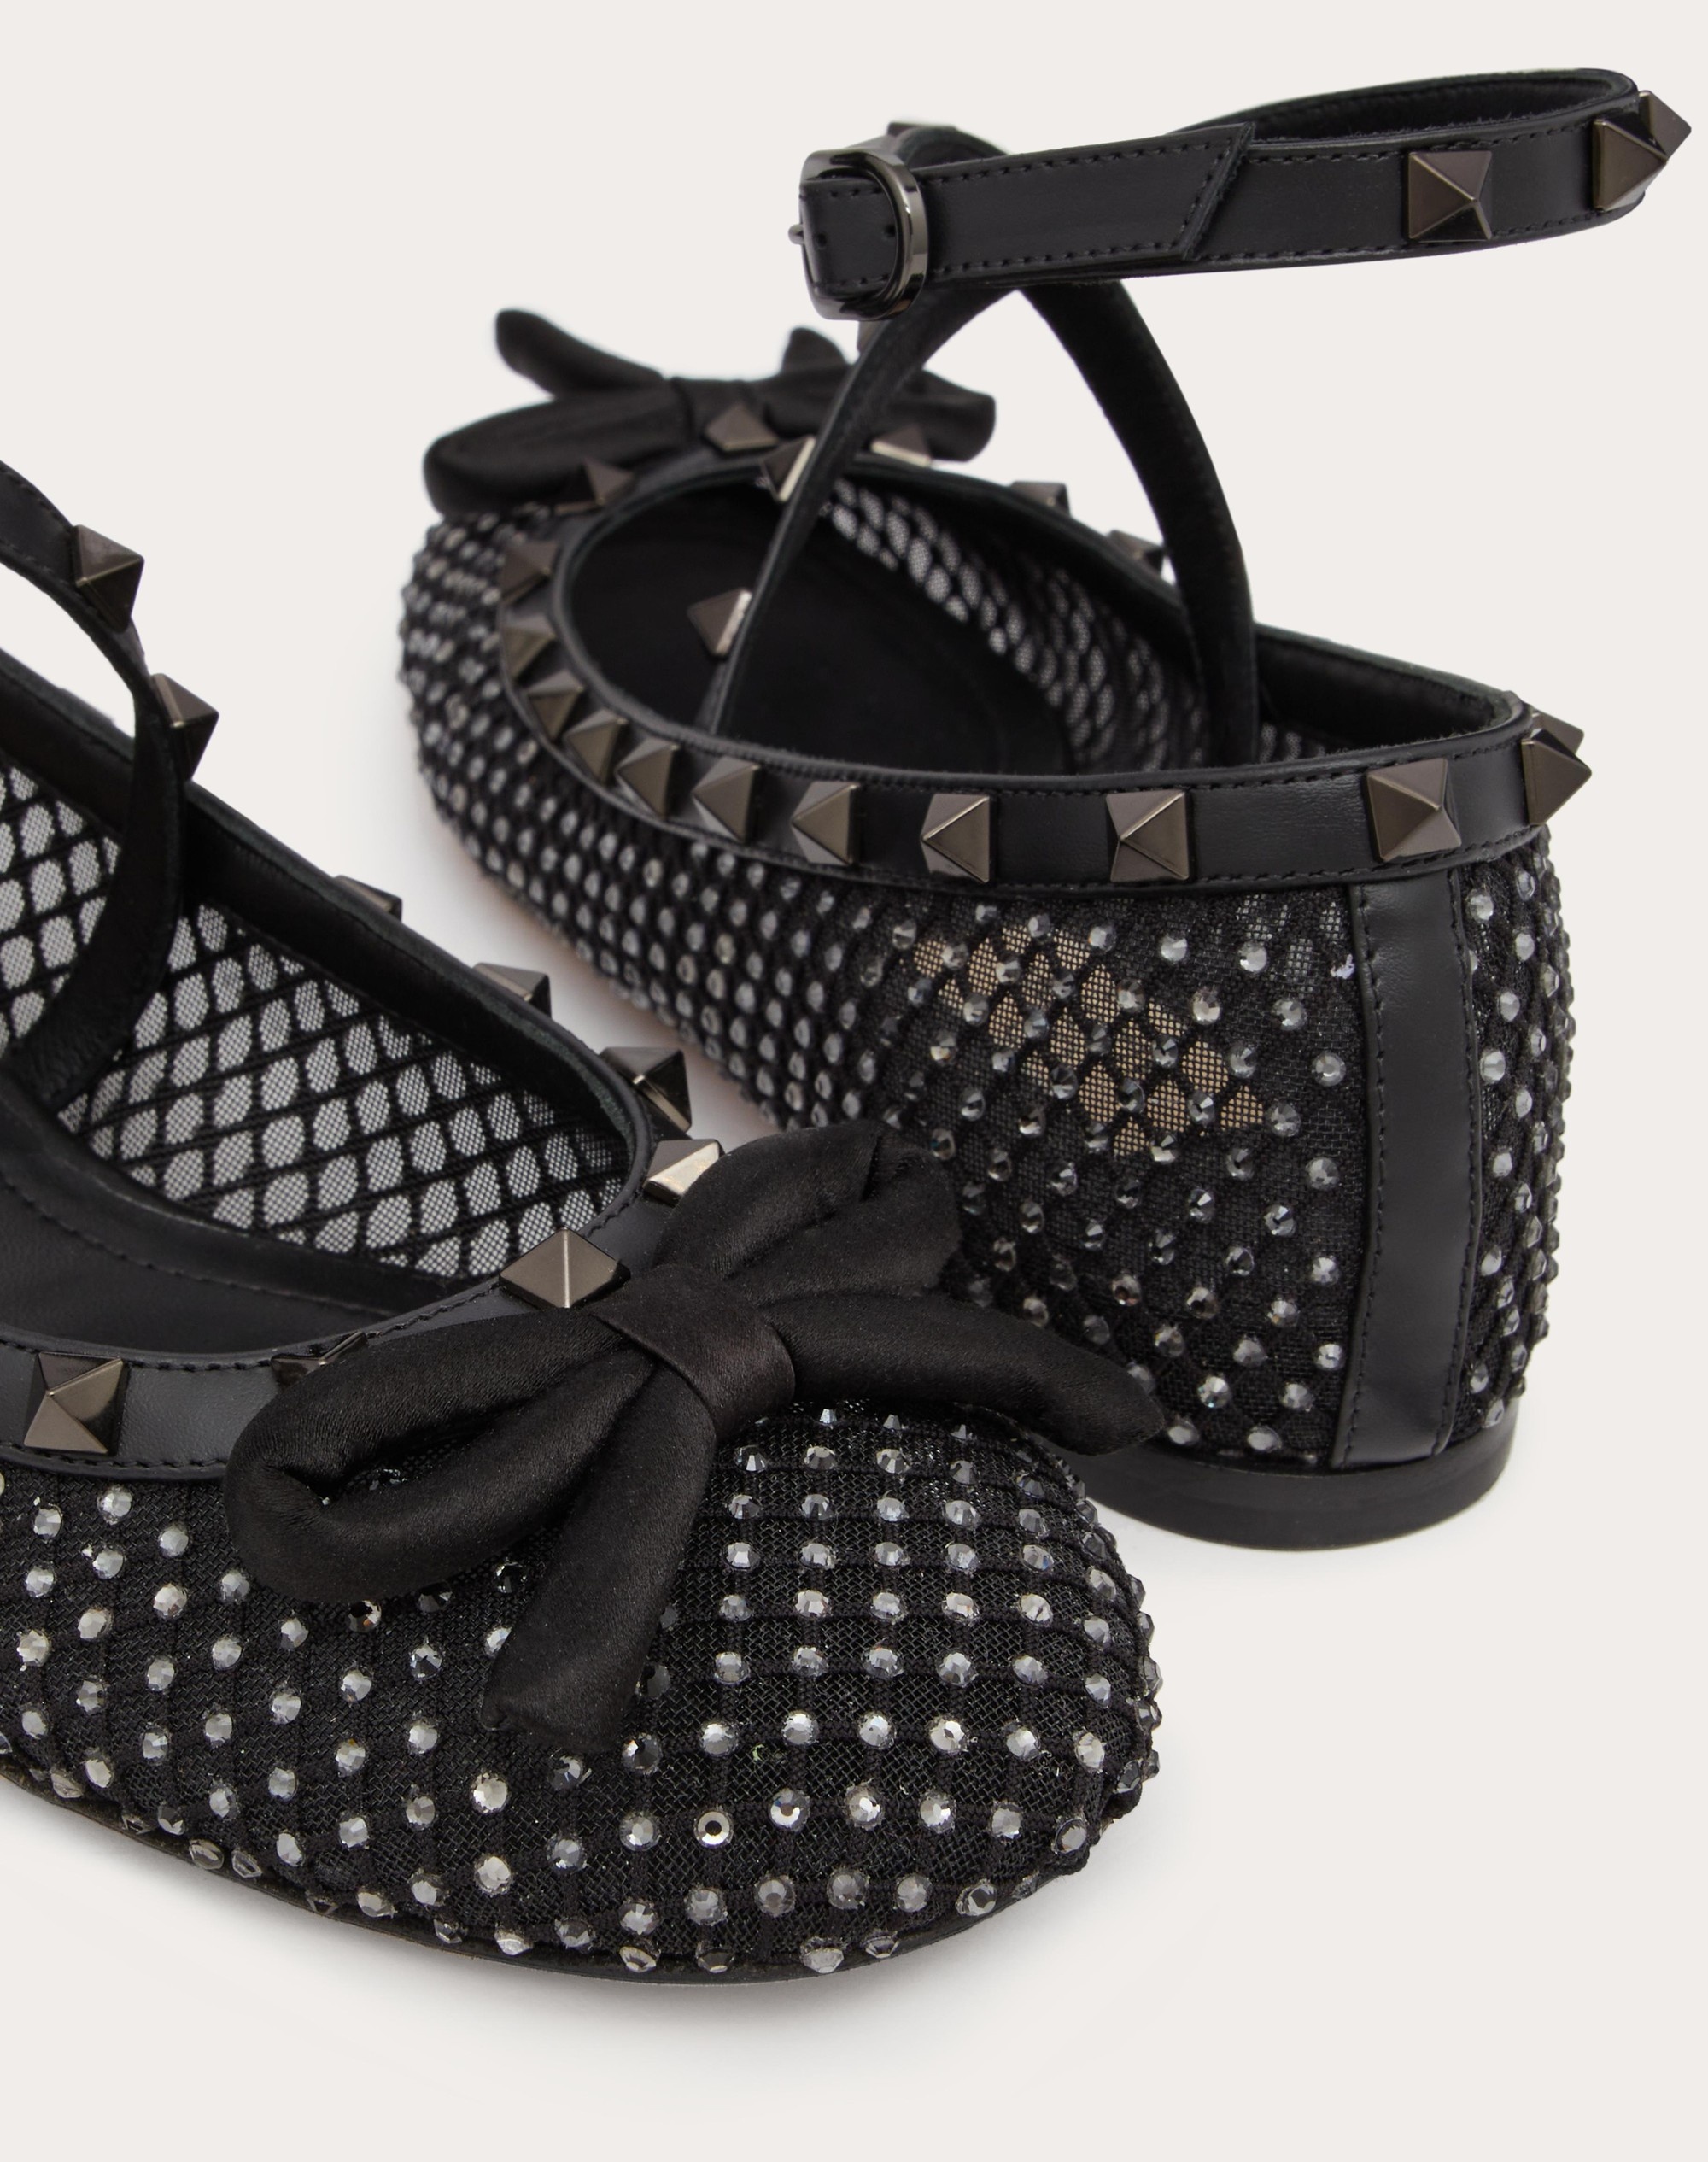 ROCKSTUD MESH BALLERINA WITH CRYSTALS AND MATCHING STUDS - 5